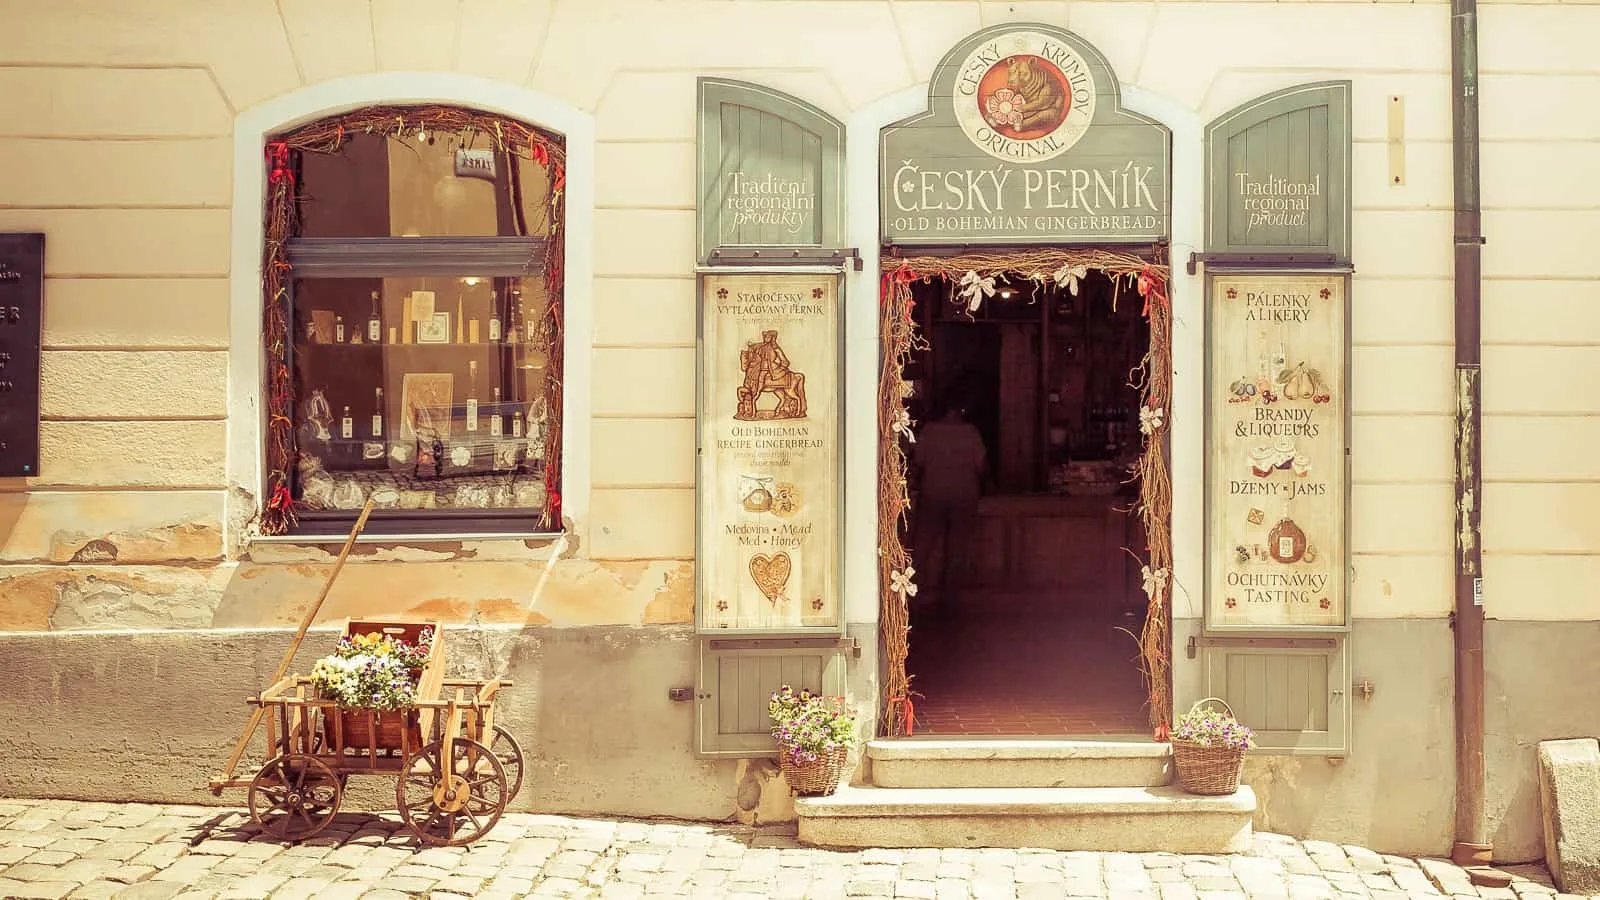 I wish I'd known just what a tourist trap Cesky Krumlov is. If you're not one for tourist traps either, here's how to enjoy Cesky Krumlov.